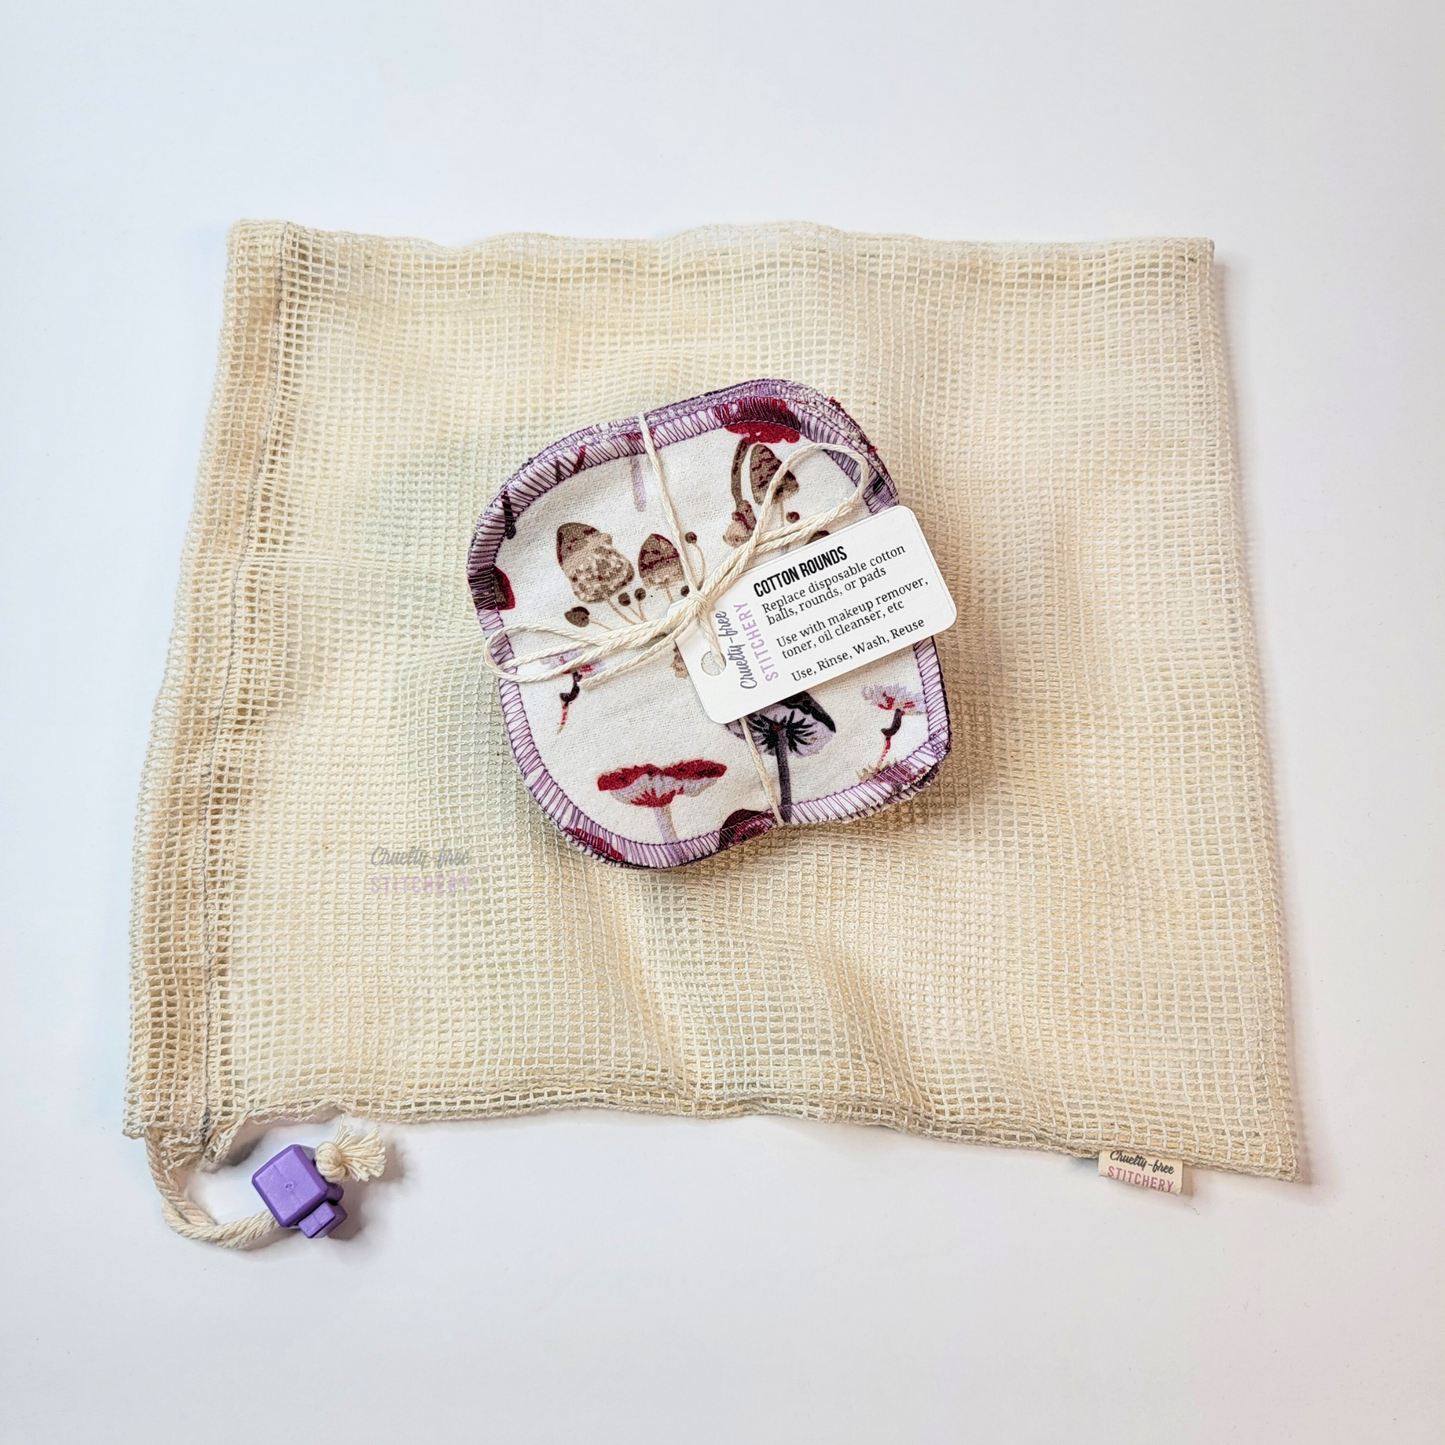 A bundled pack of the mushrooms print cotton rounds laid on top of an organic cotton mesh washing bag. It is an off white natural color with square mesh, and a lilac purple cord stop on the drawstring.